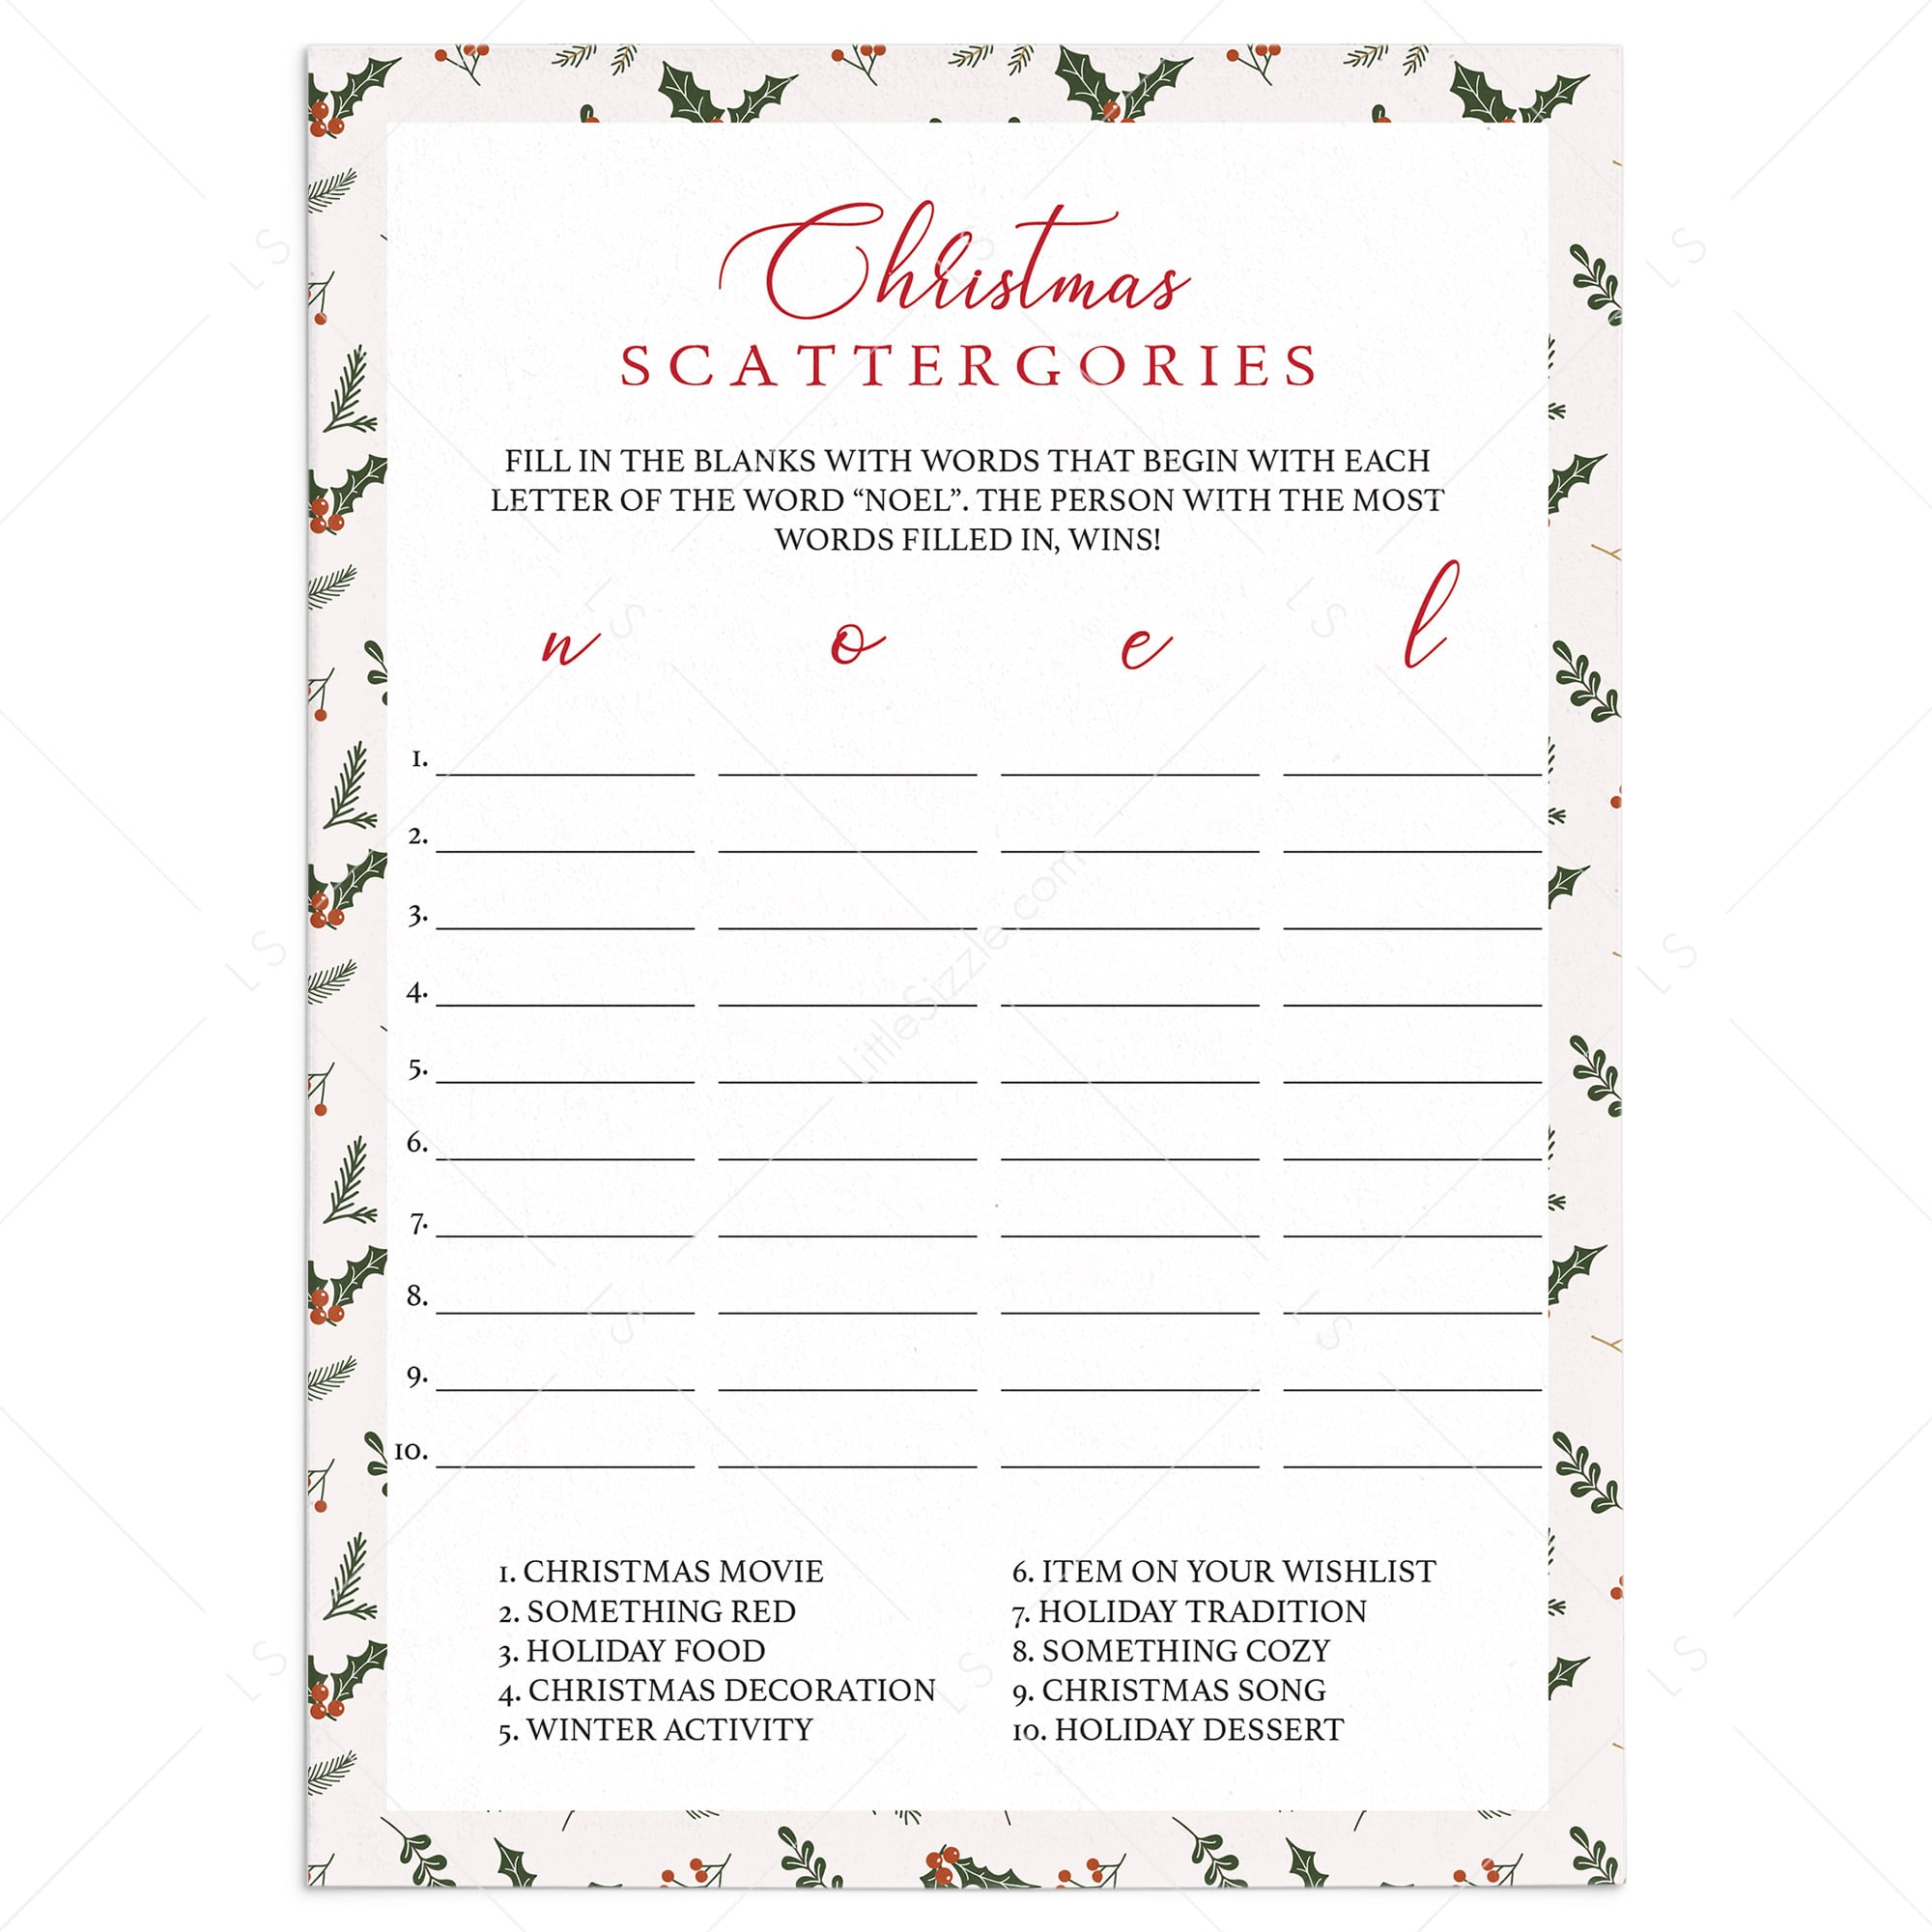 Scattergories Christmas Game Download by LittleSizzle